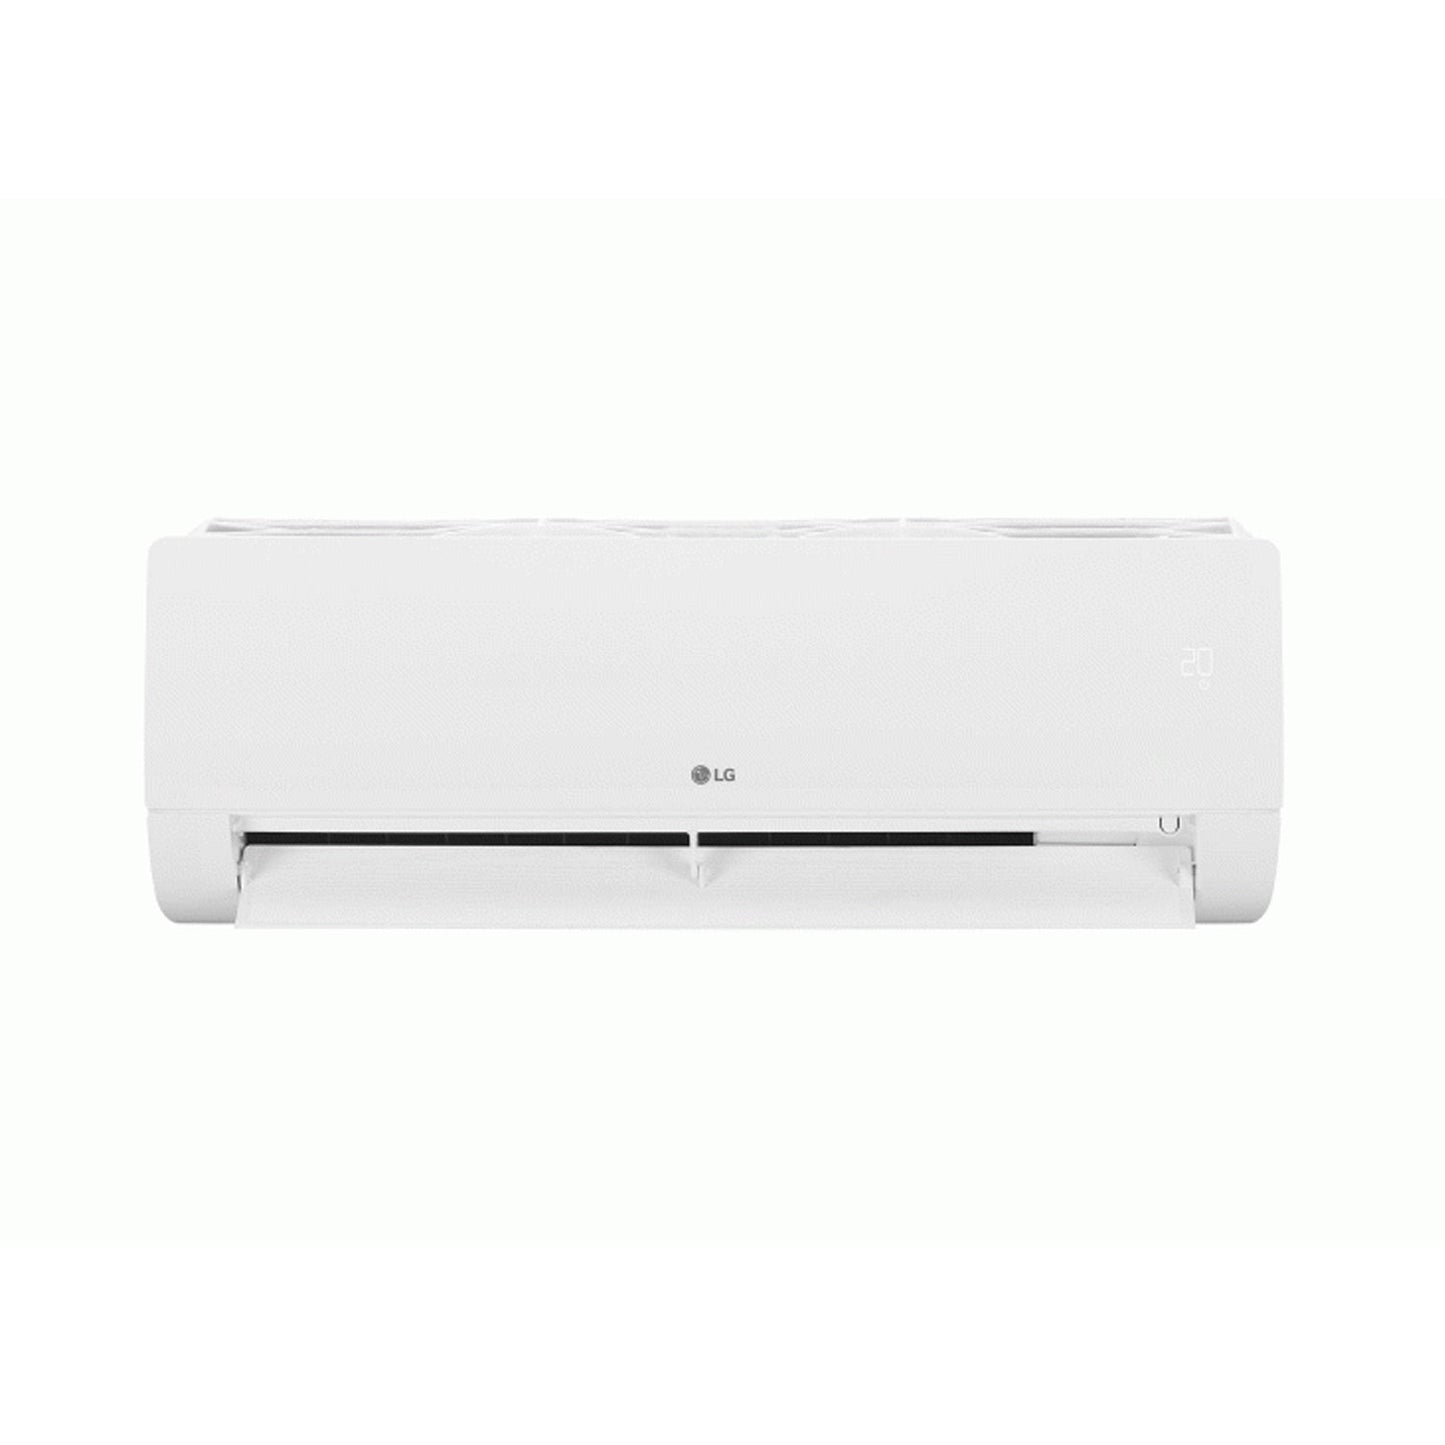 LG Basic Dual Inverter Split AC 1HP : Advanced Features for Comfort